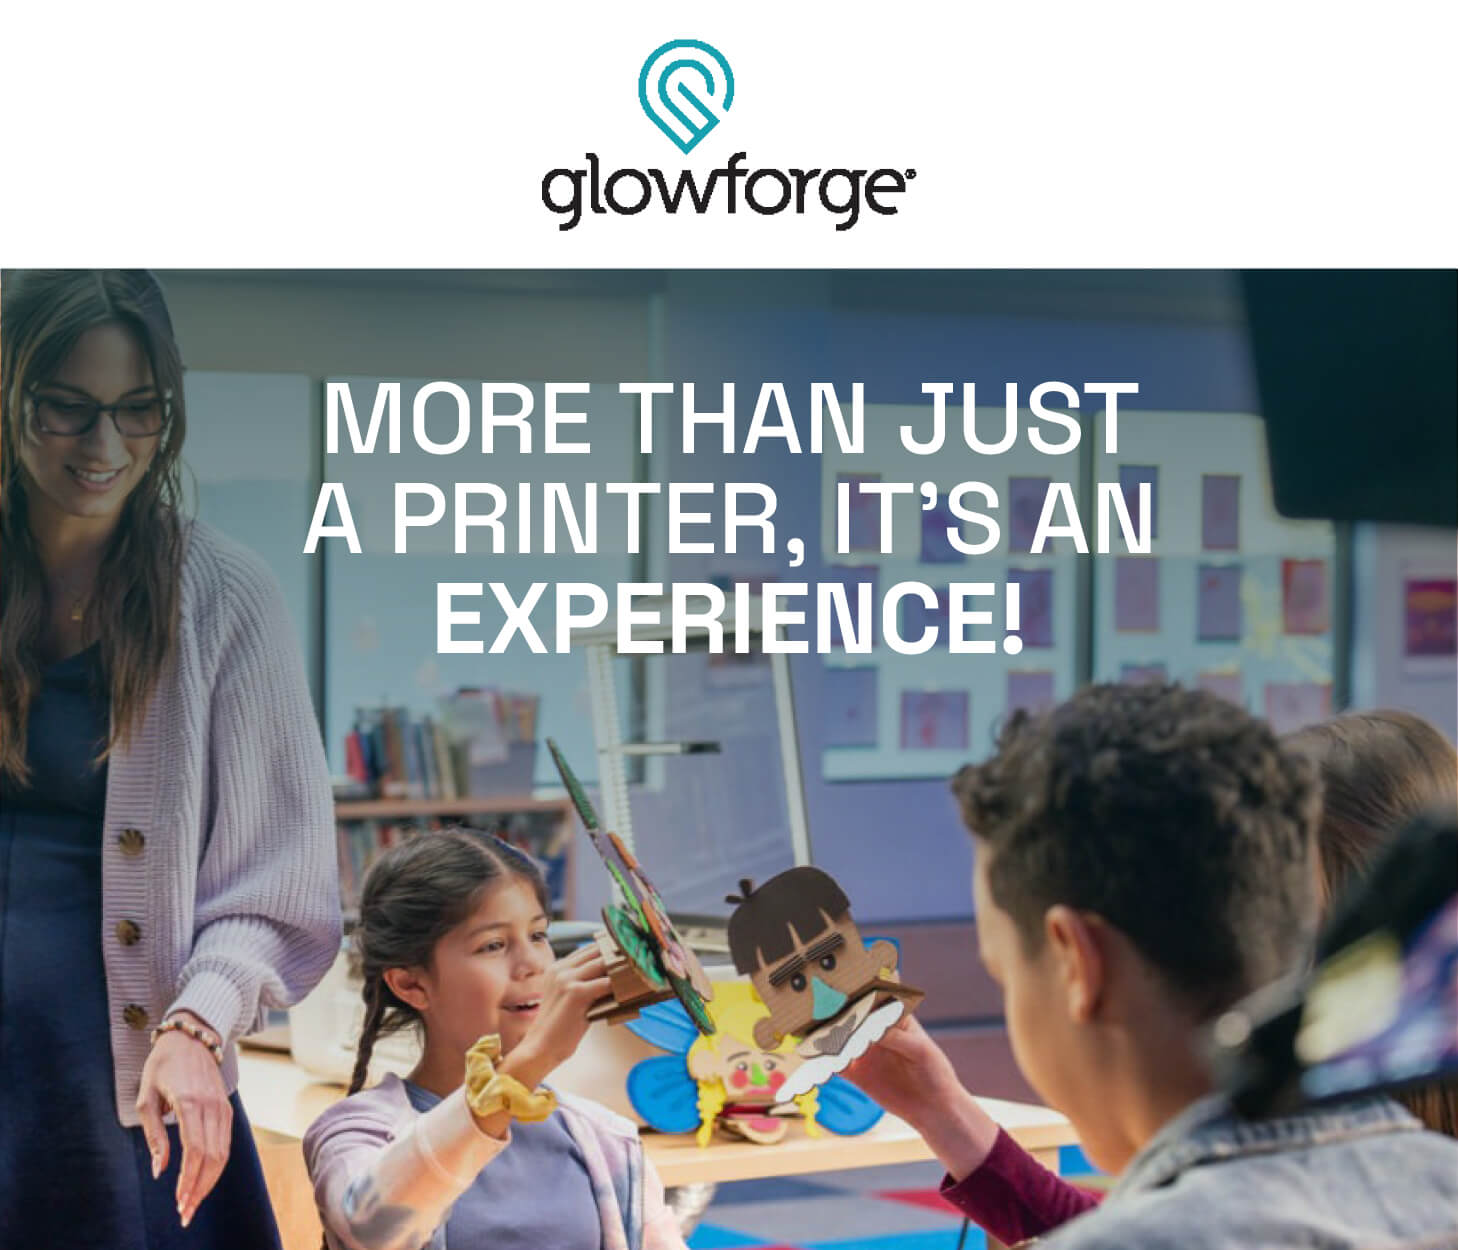 Glowforge. More than just a printer, it's an experience!